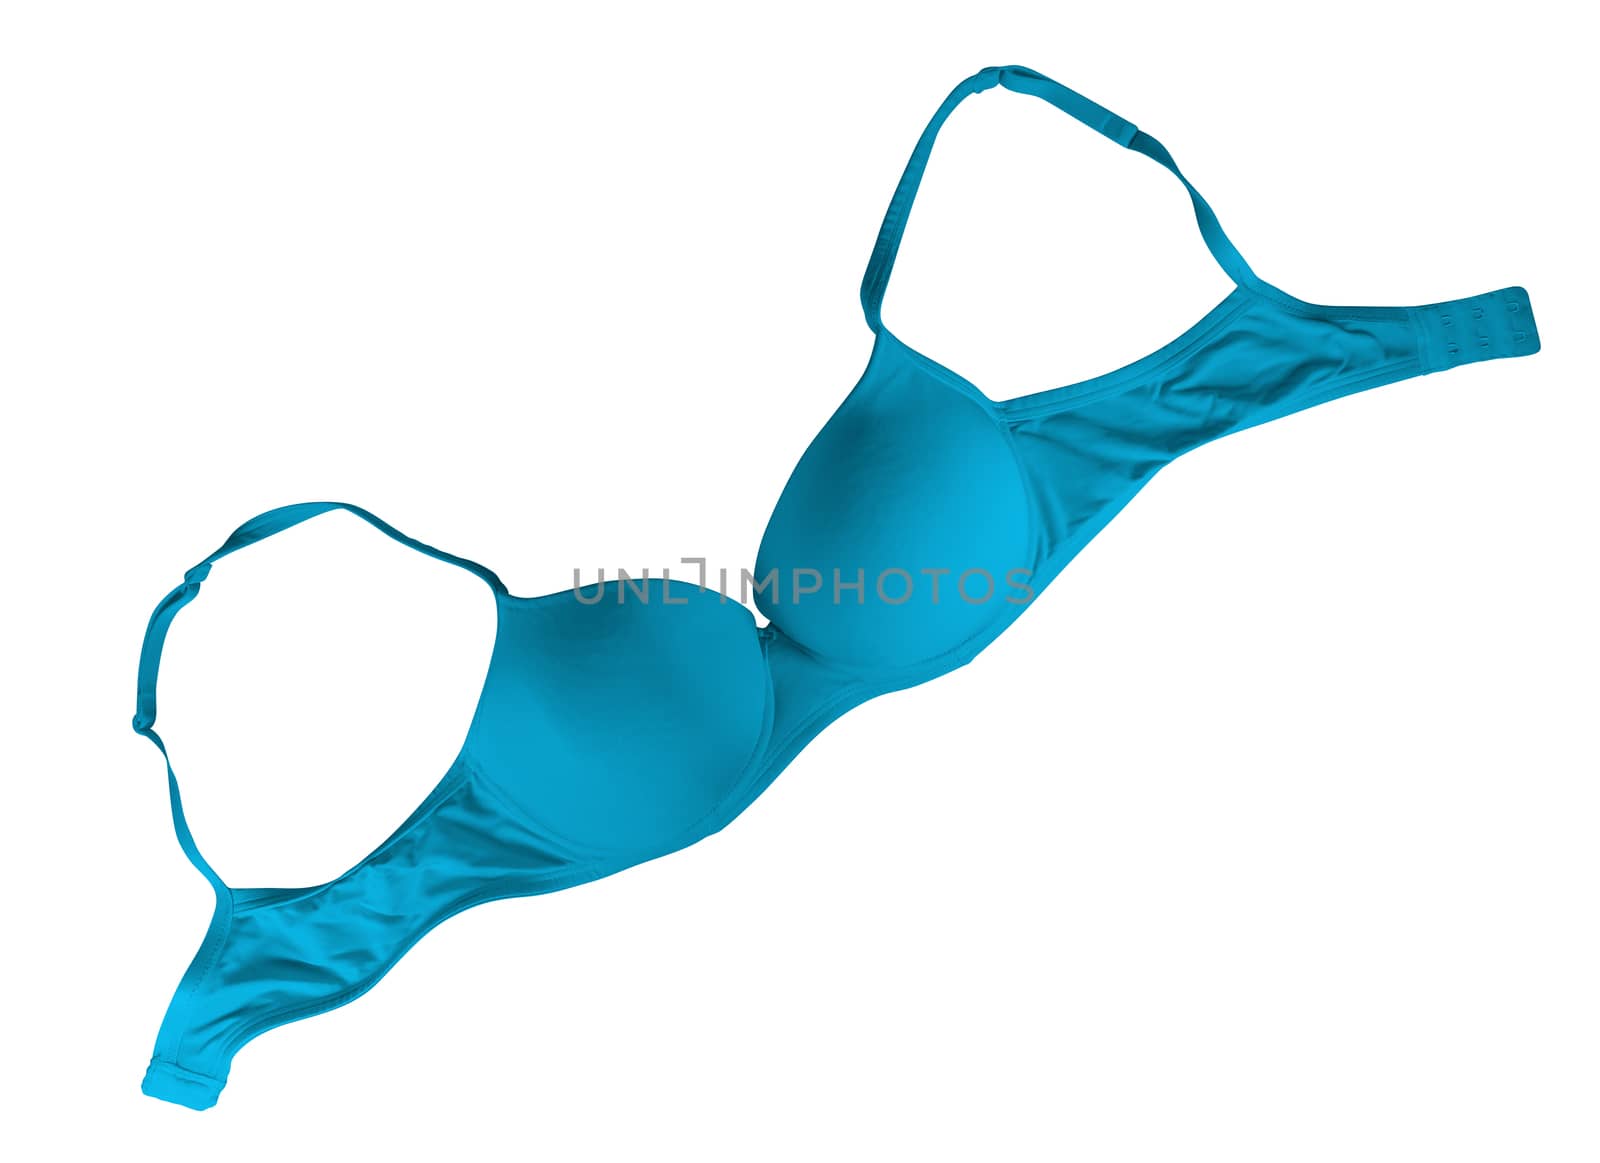 Blue brassiere isolated on white. Clipping Path included.